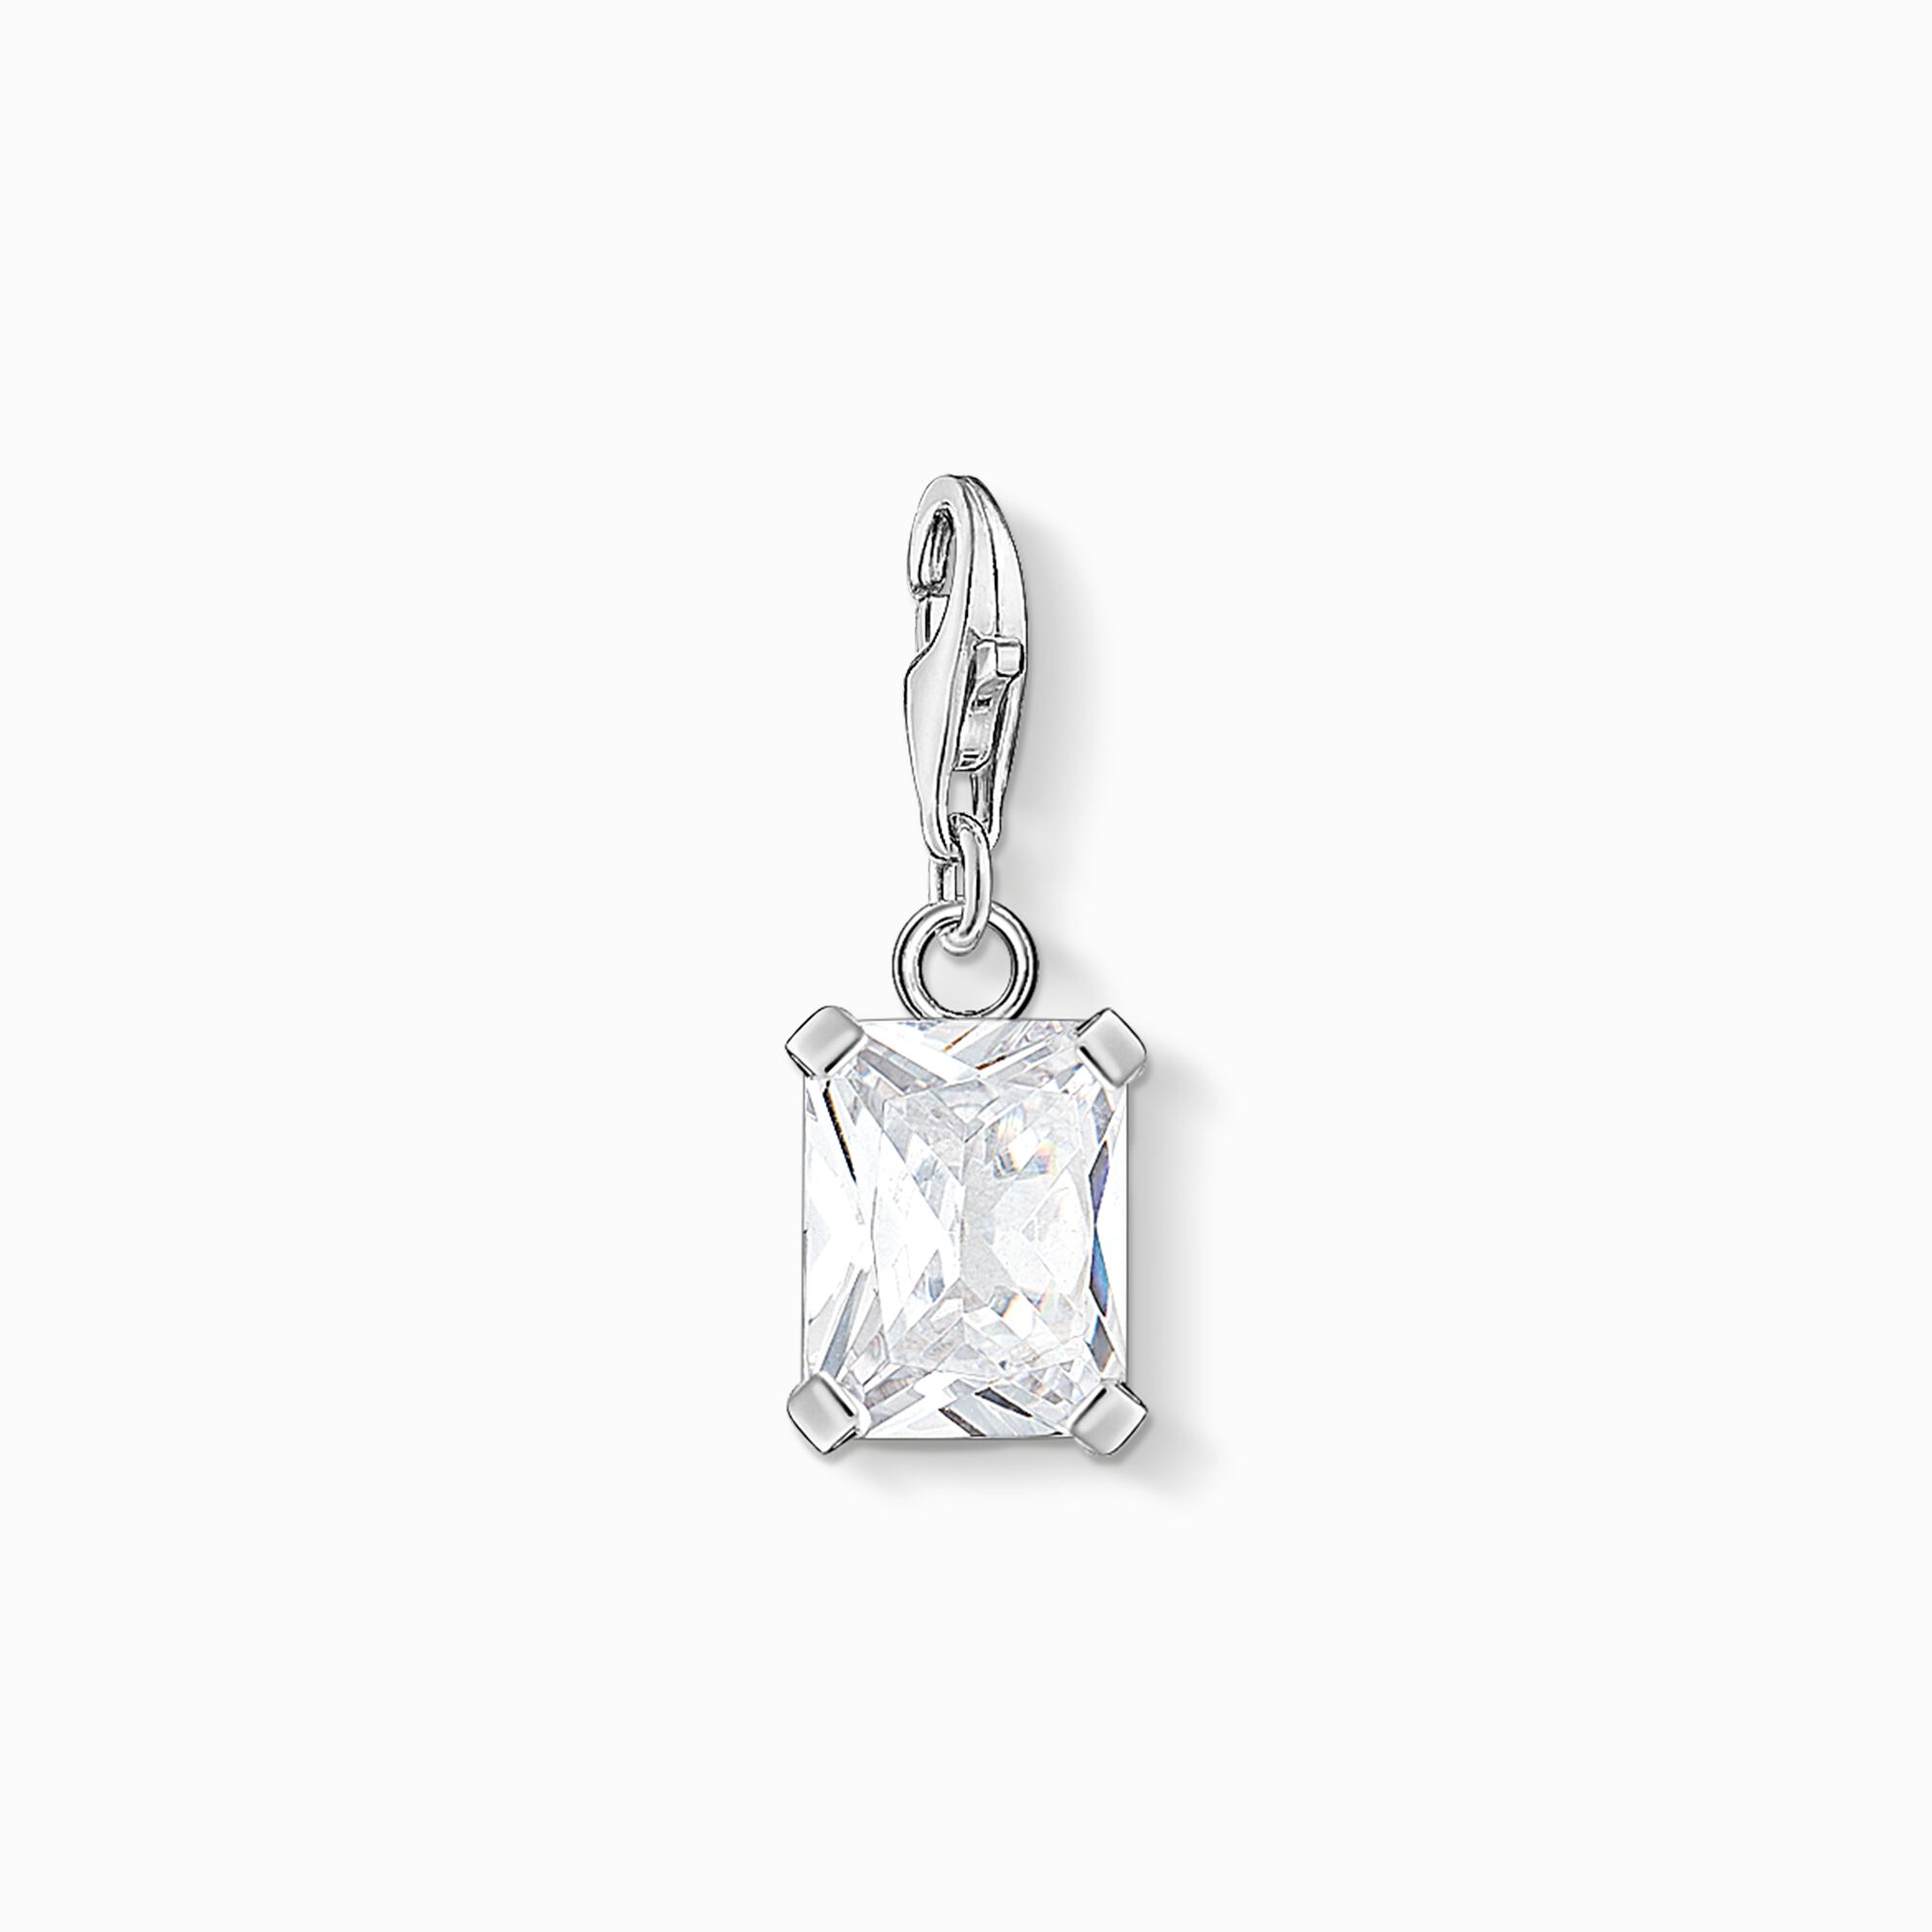 charm pendant white stone from the Charm Club collection in the THOMAS SABO online store